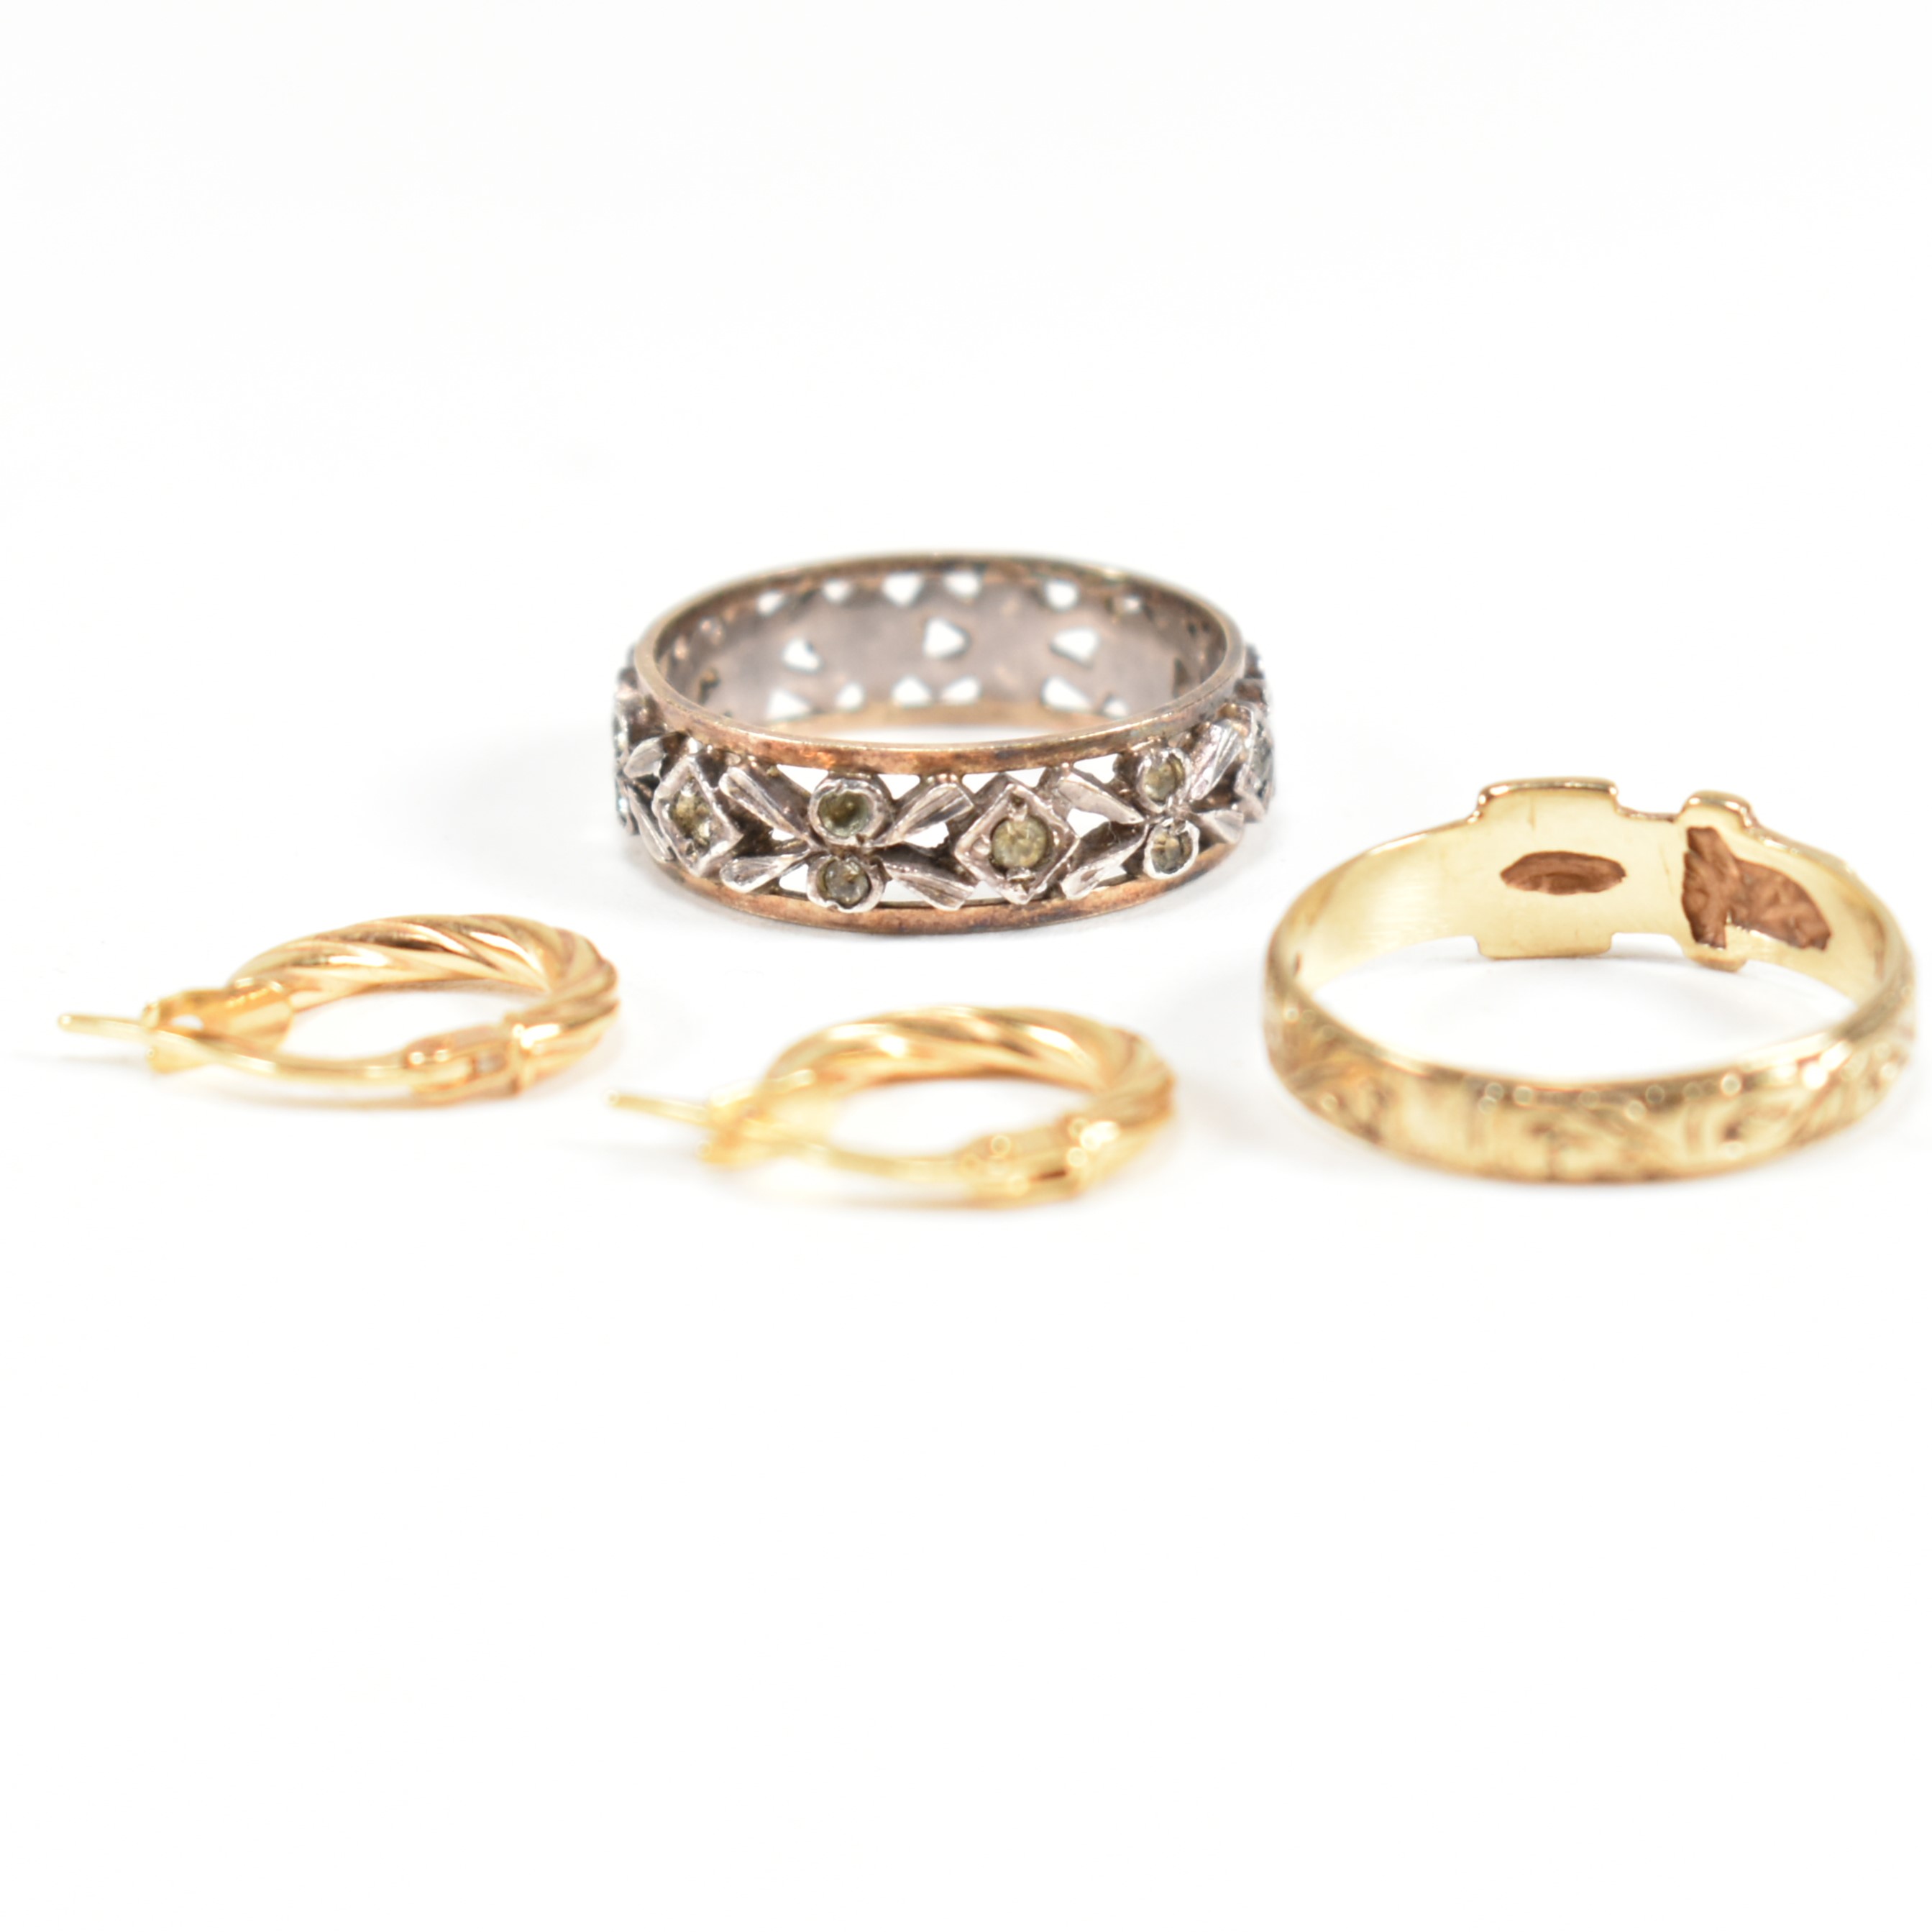 COLLECTION OF 9CT GOLD JEWELLERY INCLUDING GOLD & SILVER ETERNITY RING - Image 6 of 13